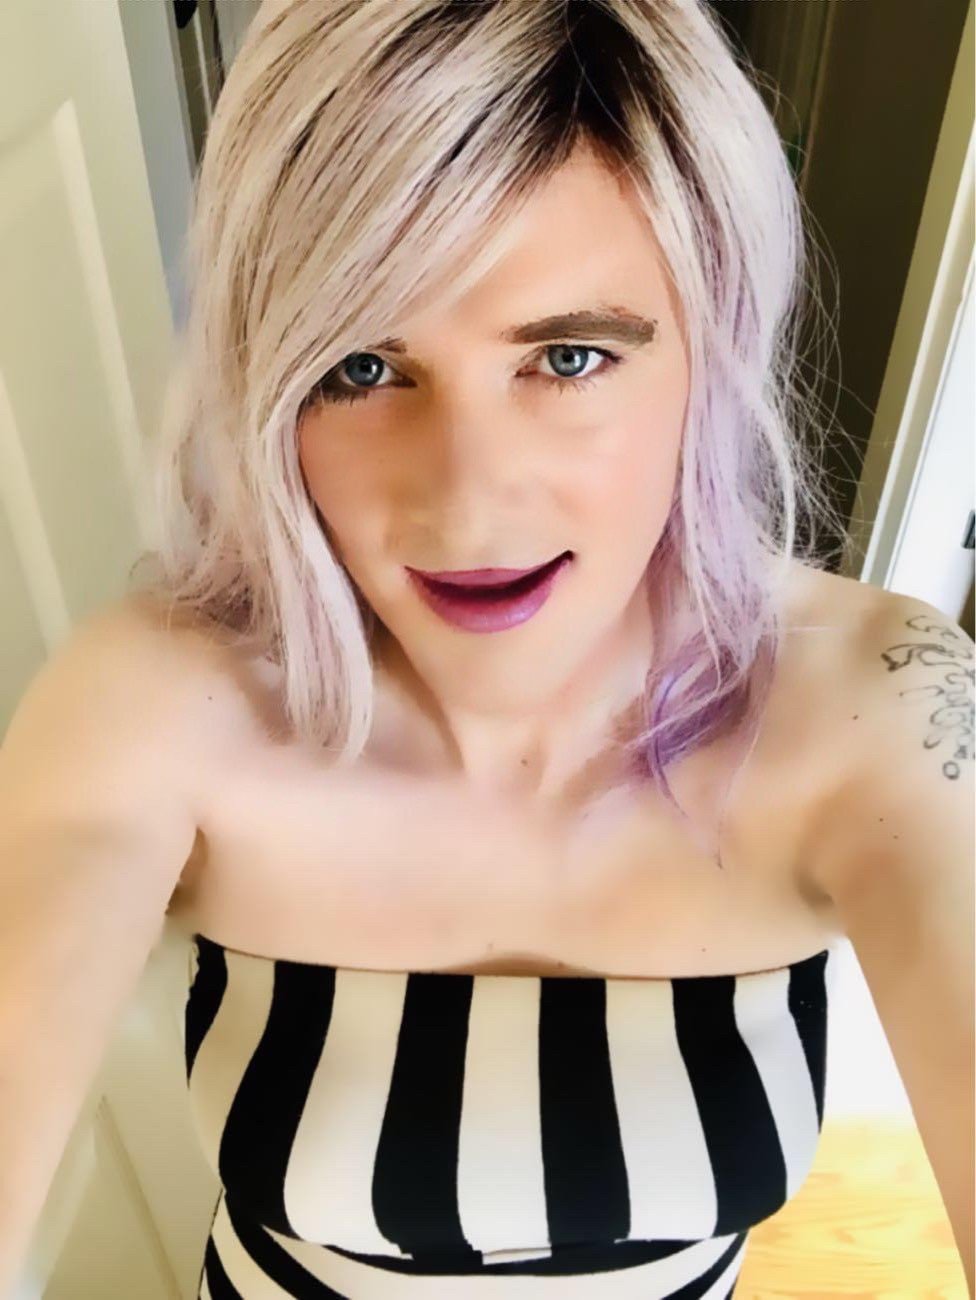 Photo by Shonni B with the username @ShonniB, who is a verified user,  May 11, 2020 at 10:54 PM. The post is about the topic sissies for daddies and the text says 'I'm a BC Canada based sissy seeking a hot daddy. hmu'